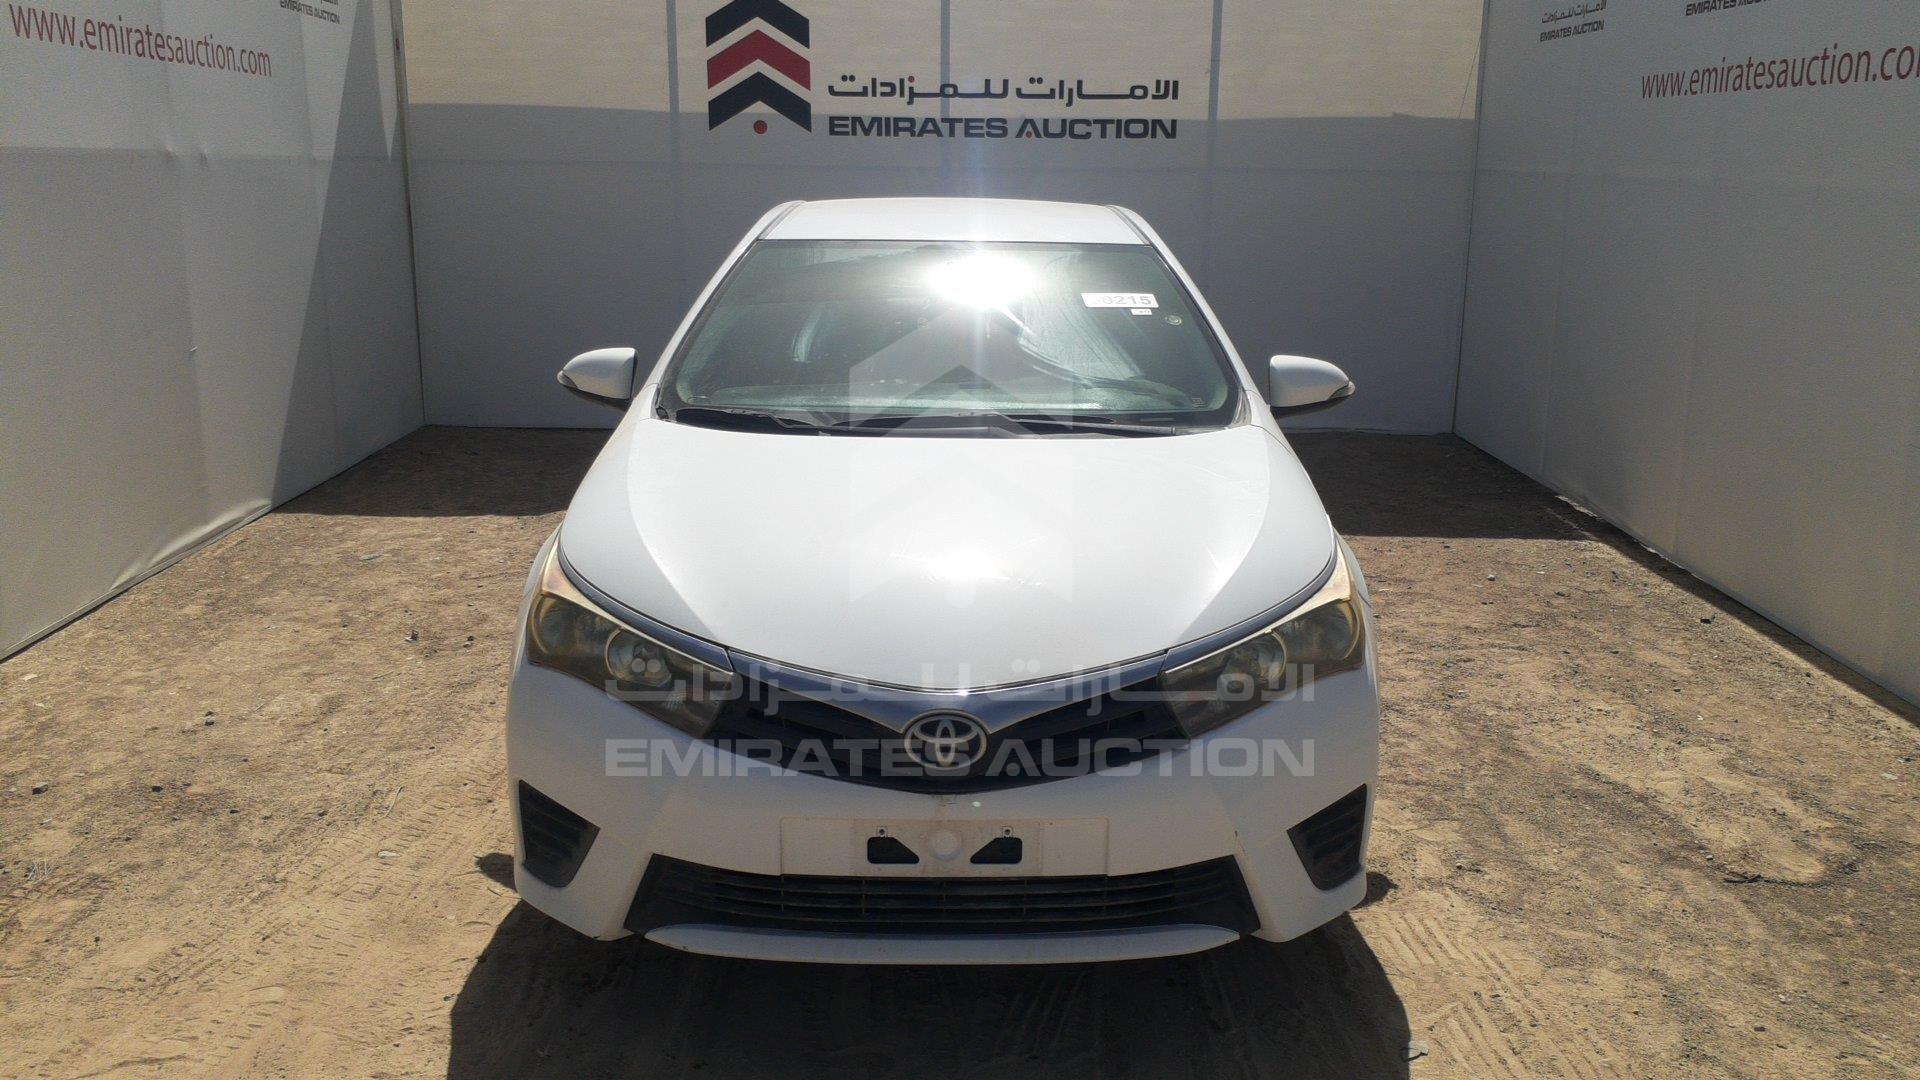 image 12 - corolla 2014 price 7000 in auction